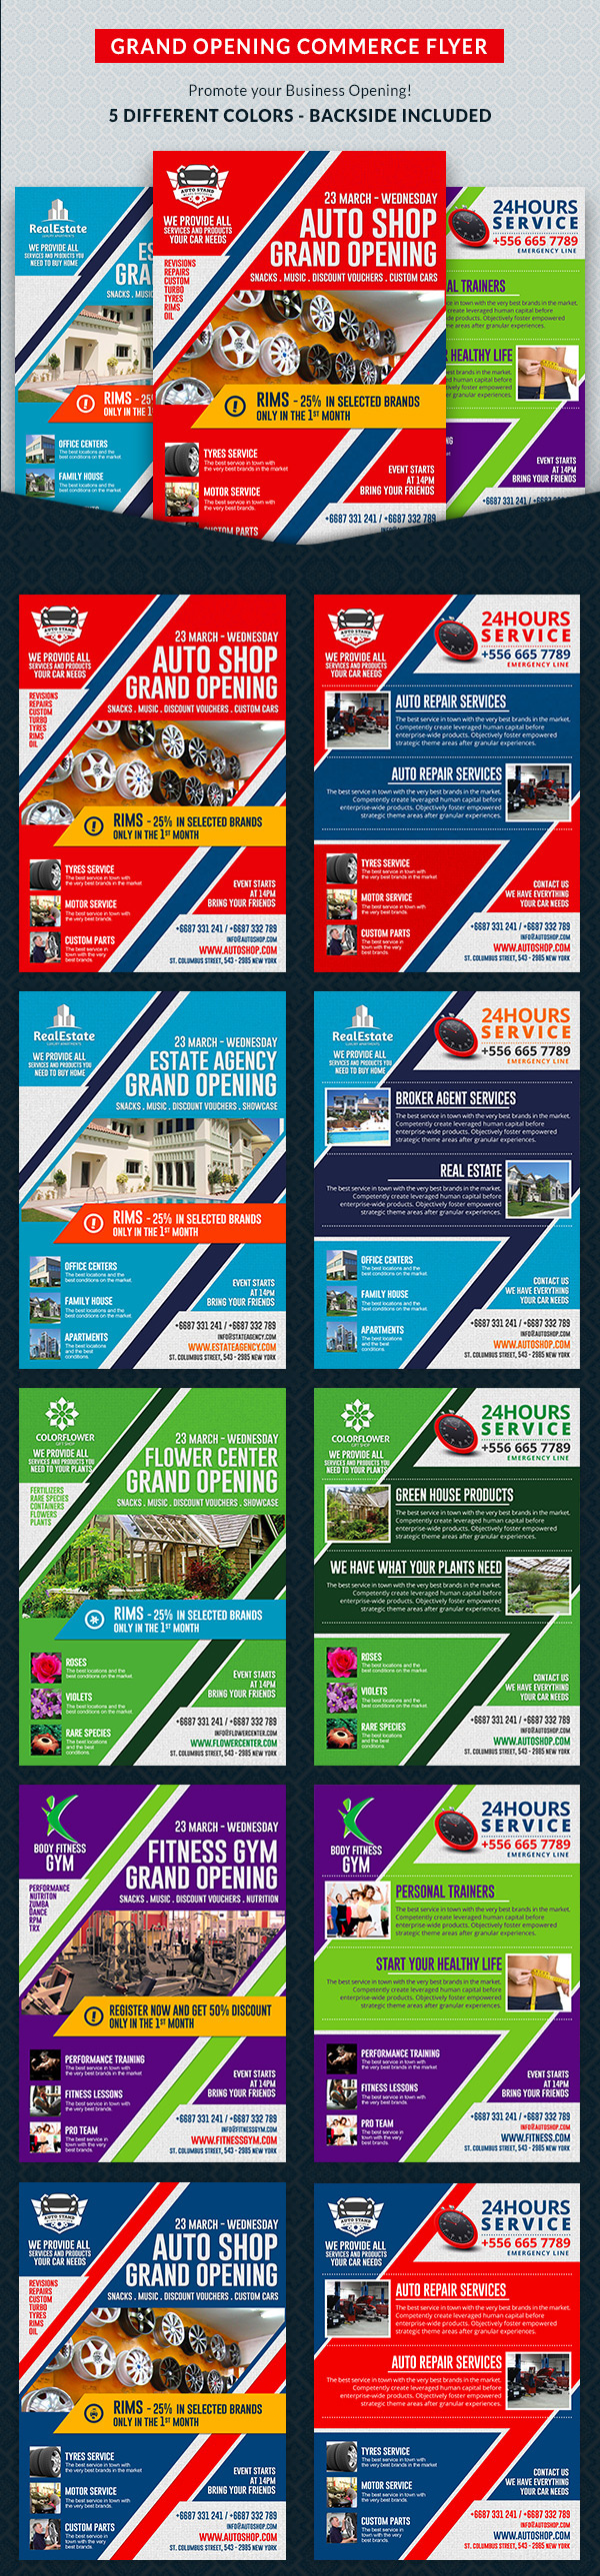 business flyer template business flyer Business PSD Template flyer psd template grand opening flyer sales and service sales commerce flyer